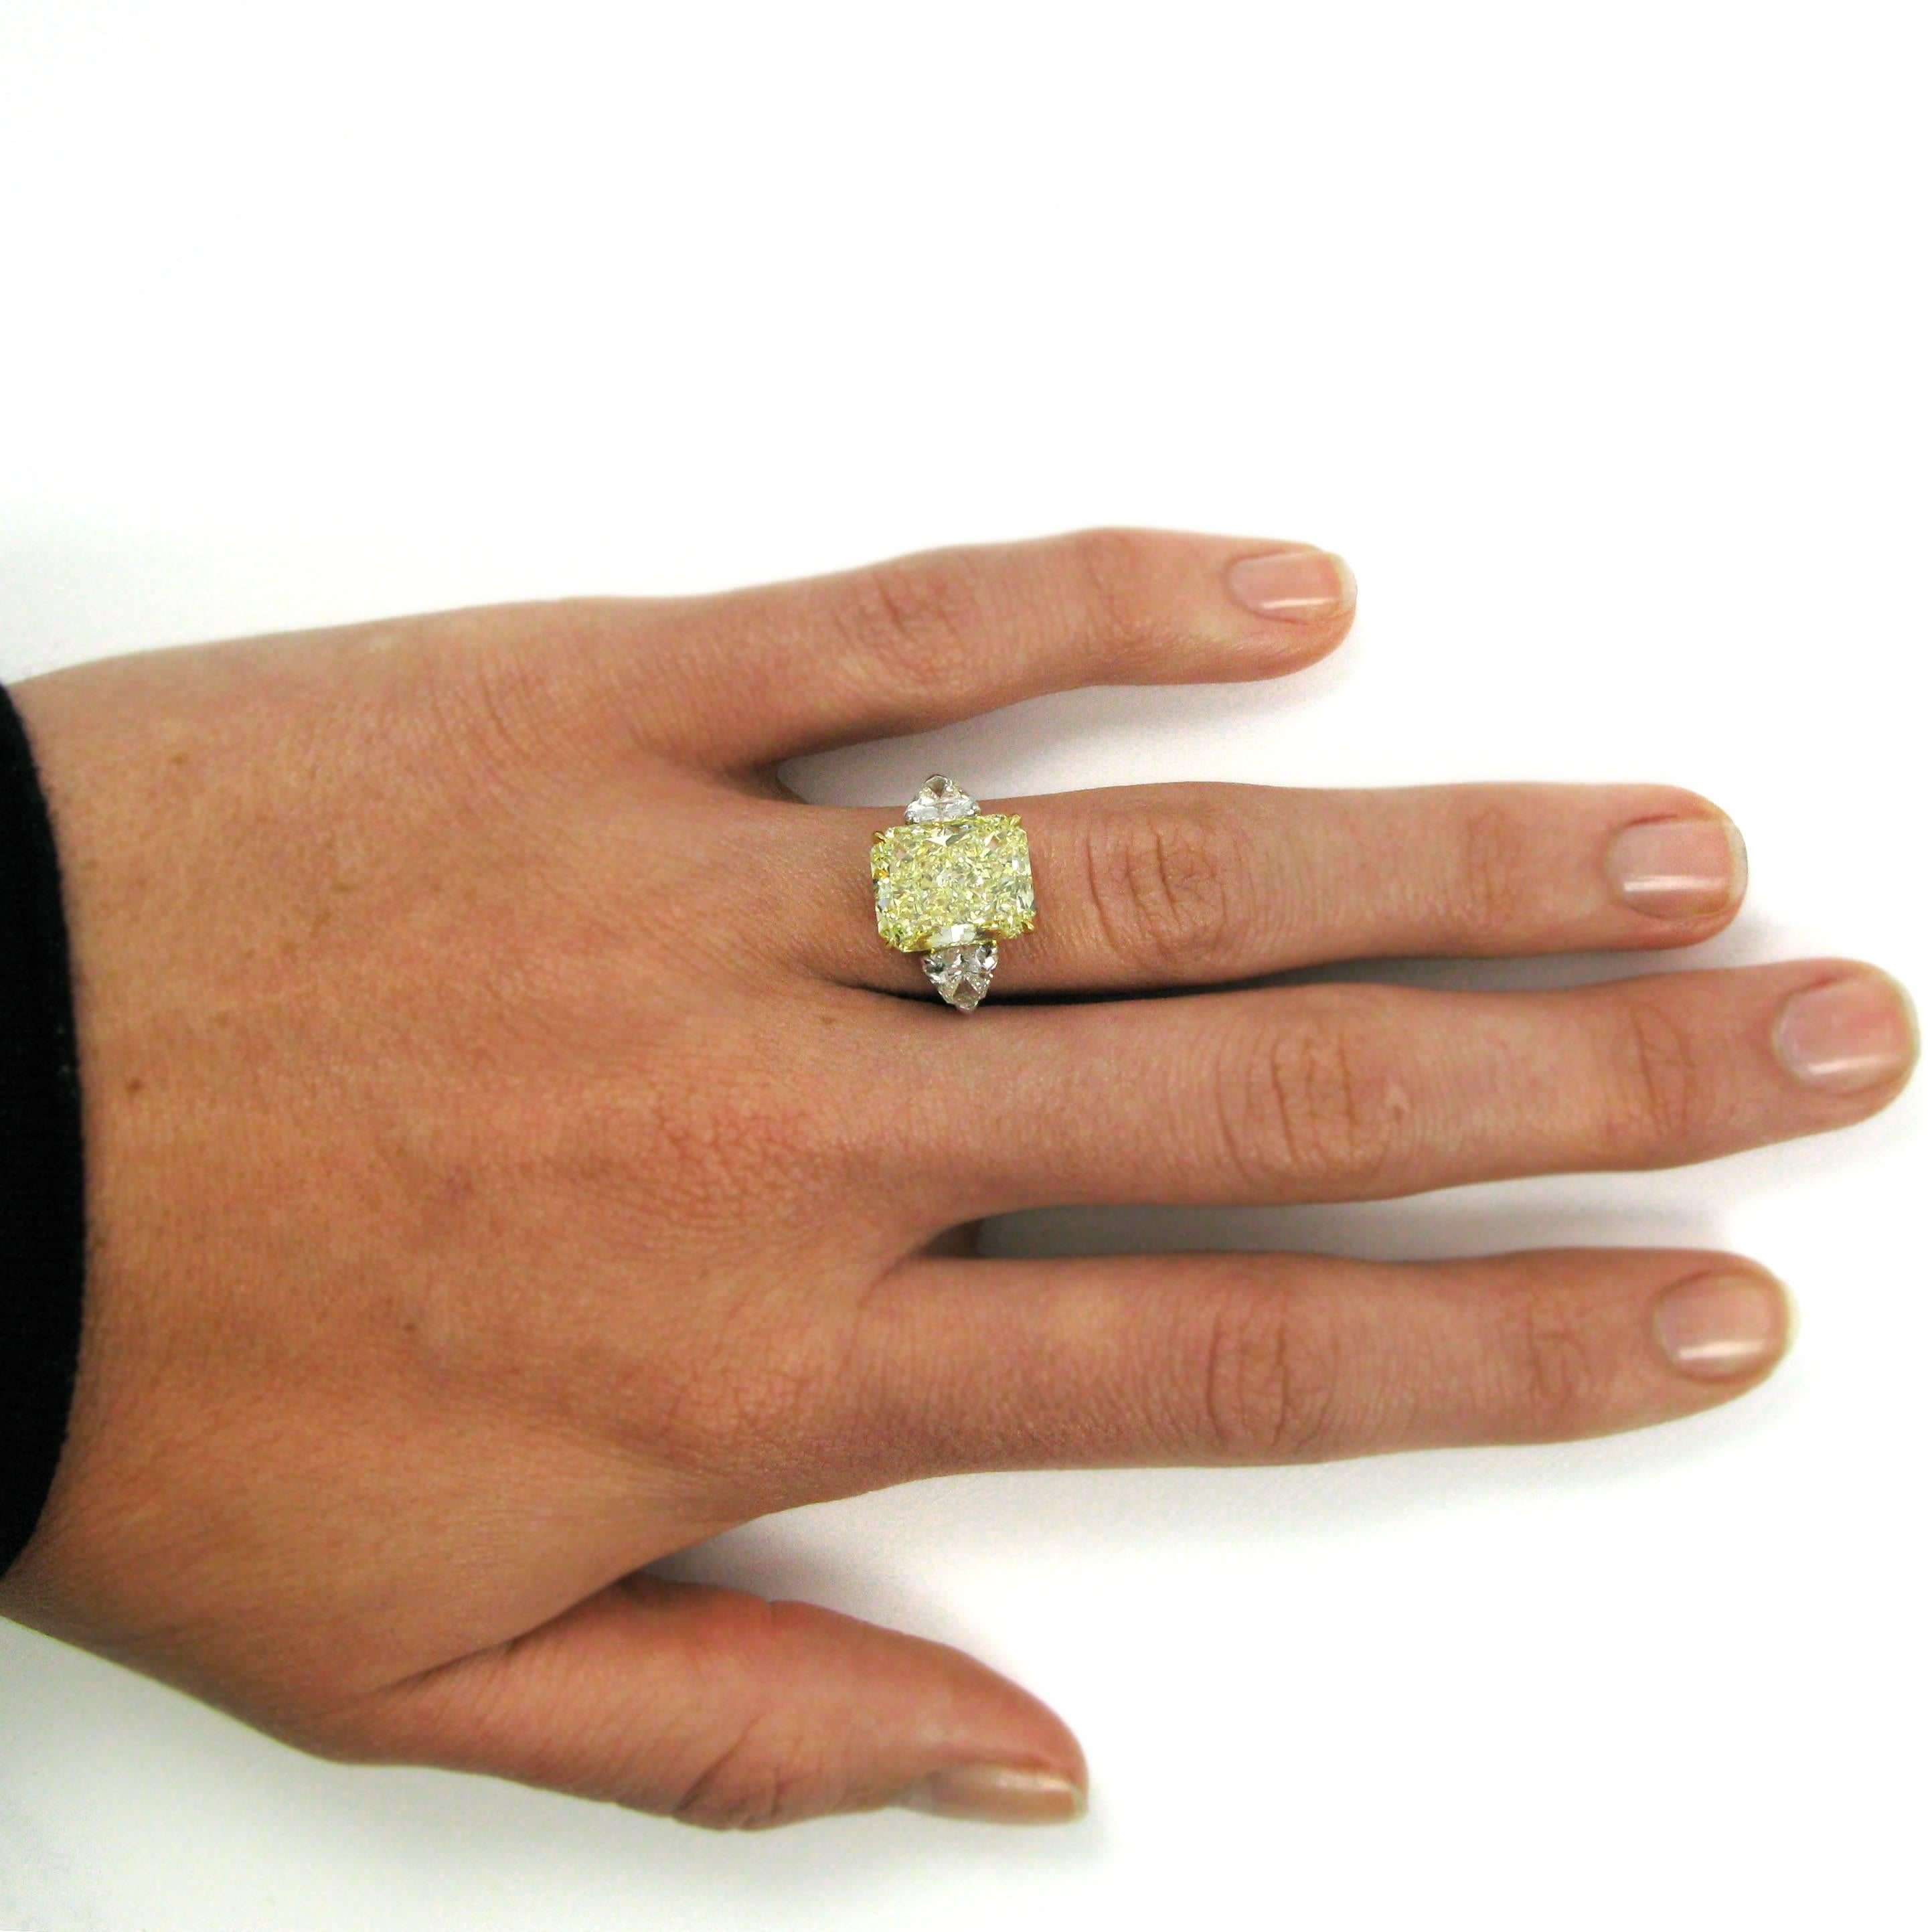 A lovely three-stone ring featuring a 7.17 carat sunshine-yellow Fancy radiant-cut diamond. The diamond is set in an 18k yellow gold basket and flanked by two shield-cut white diamonds totaling 1.62 carats, atop a platinum ring shank. 

Purchase